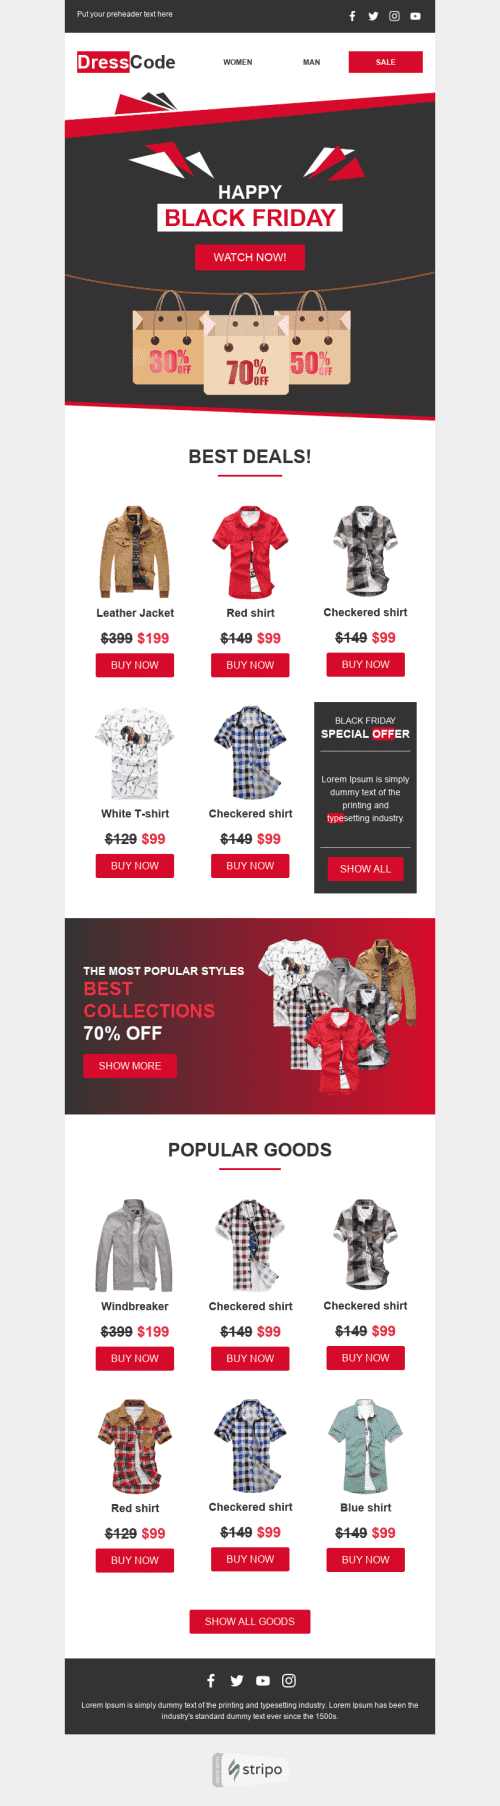 Promo Email Template «Dress Code» for Fashion industry desktop view